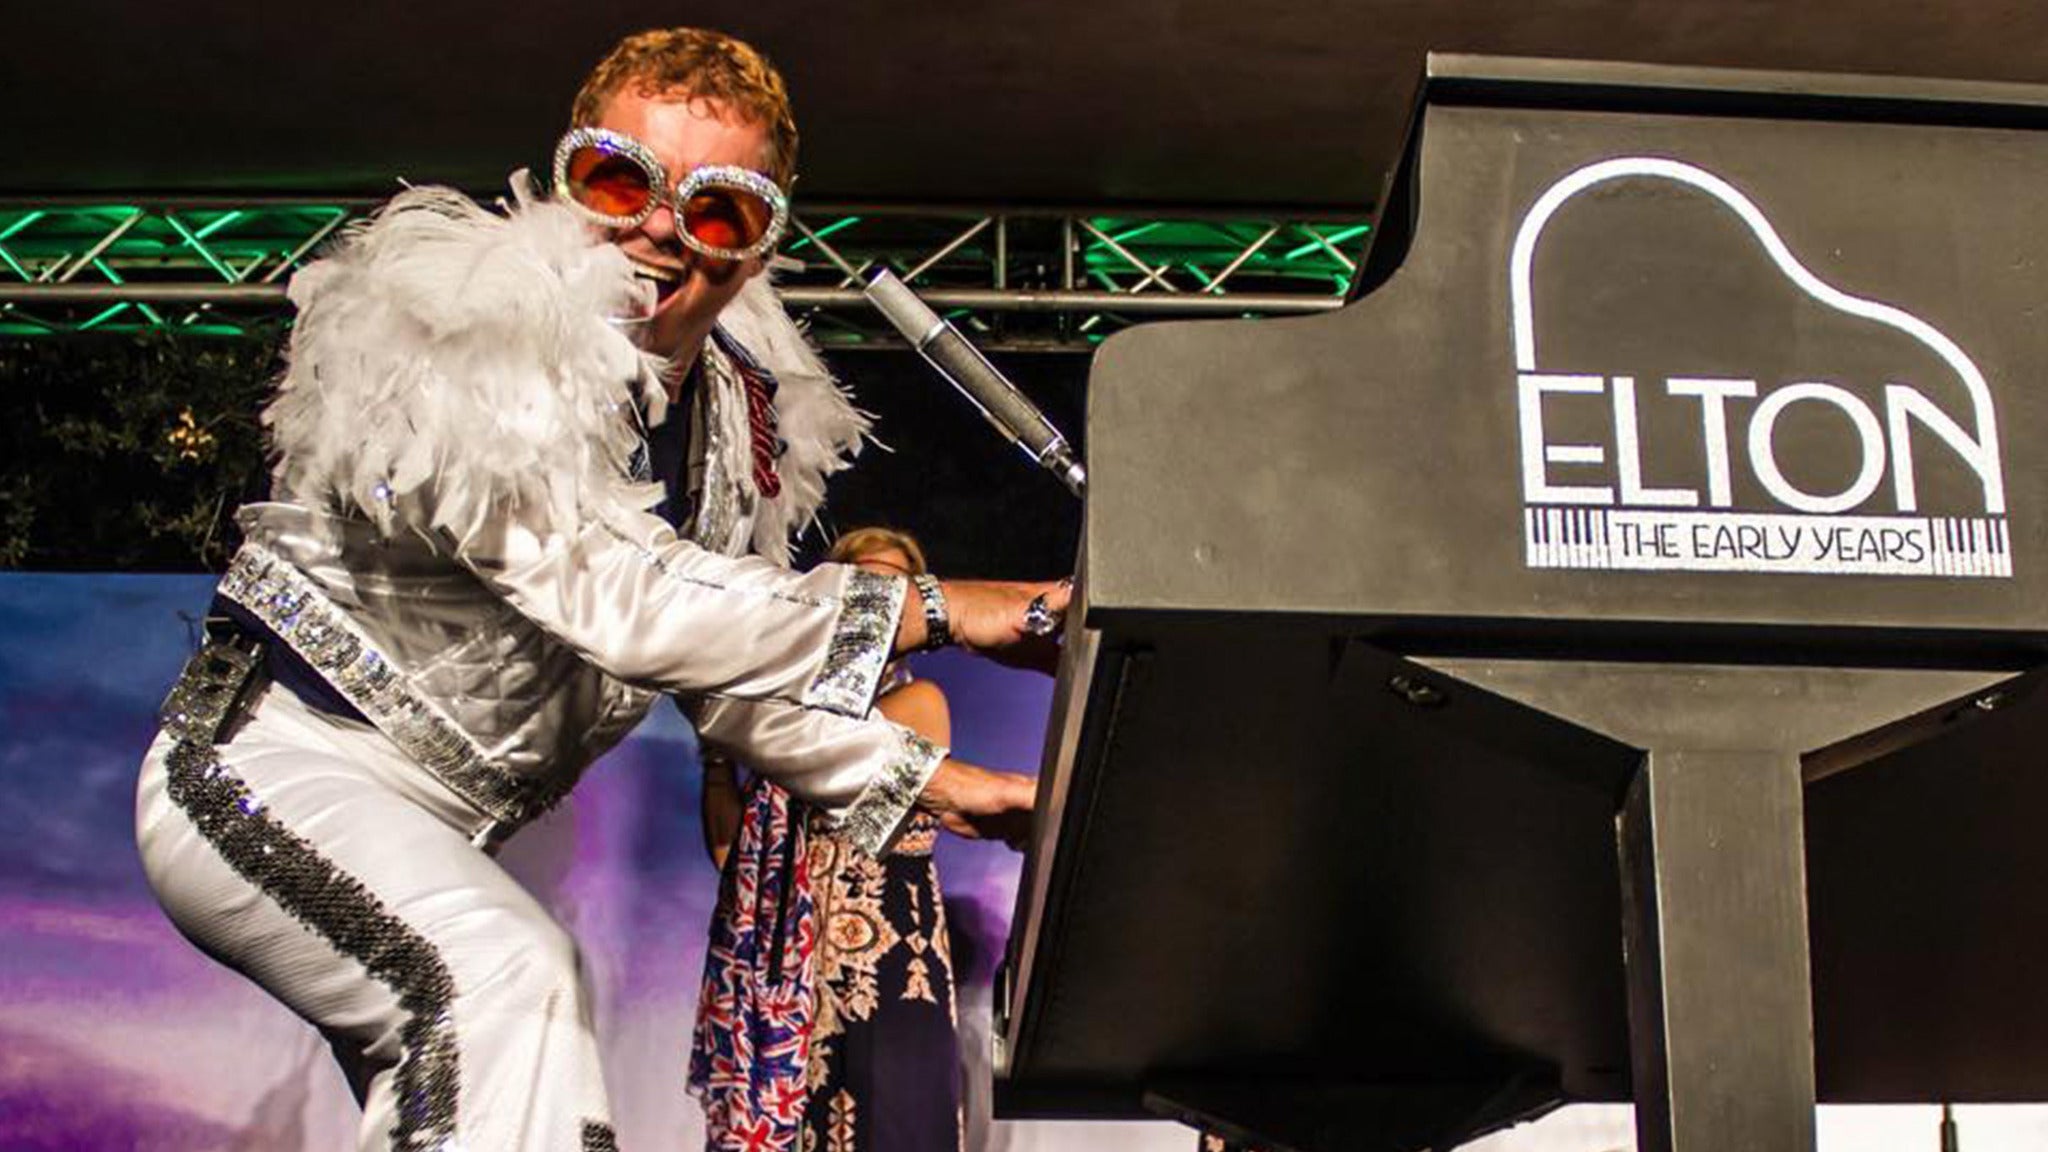 Kenny Metcalf As Elton - the Early Years